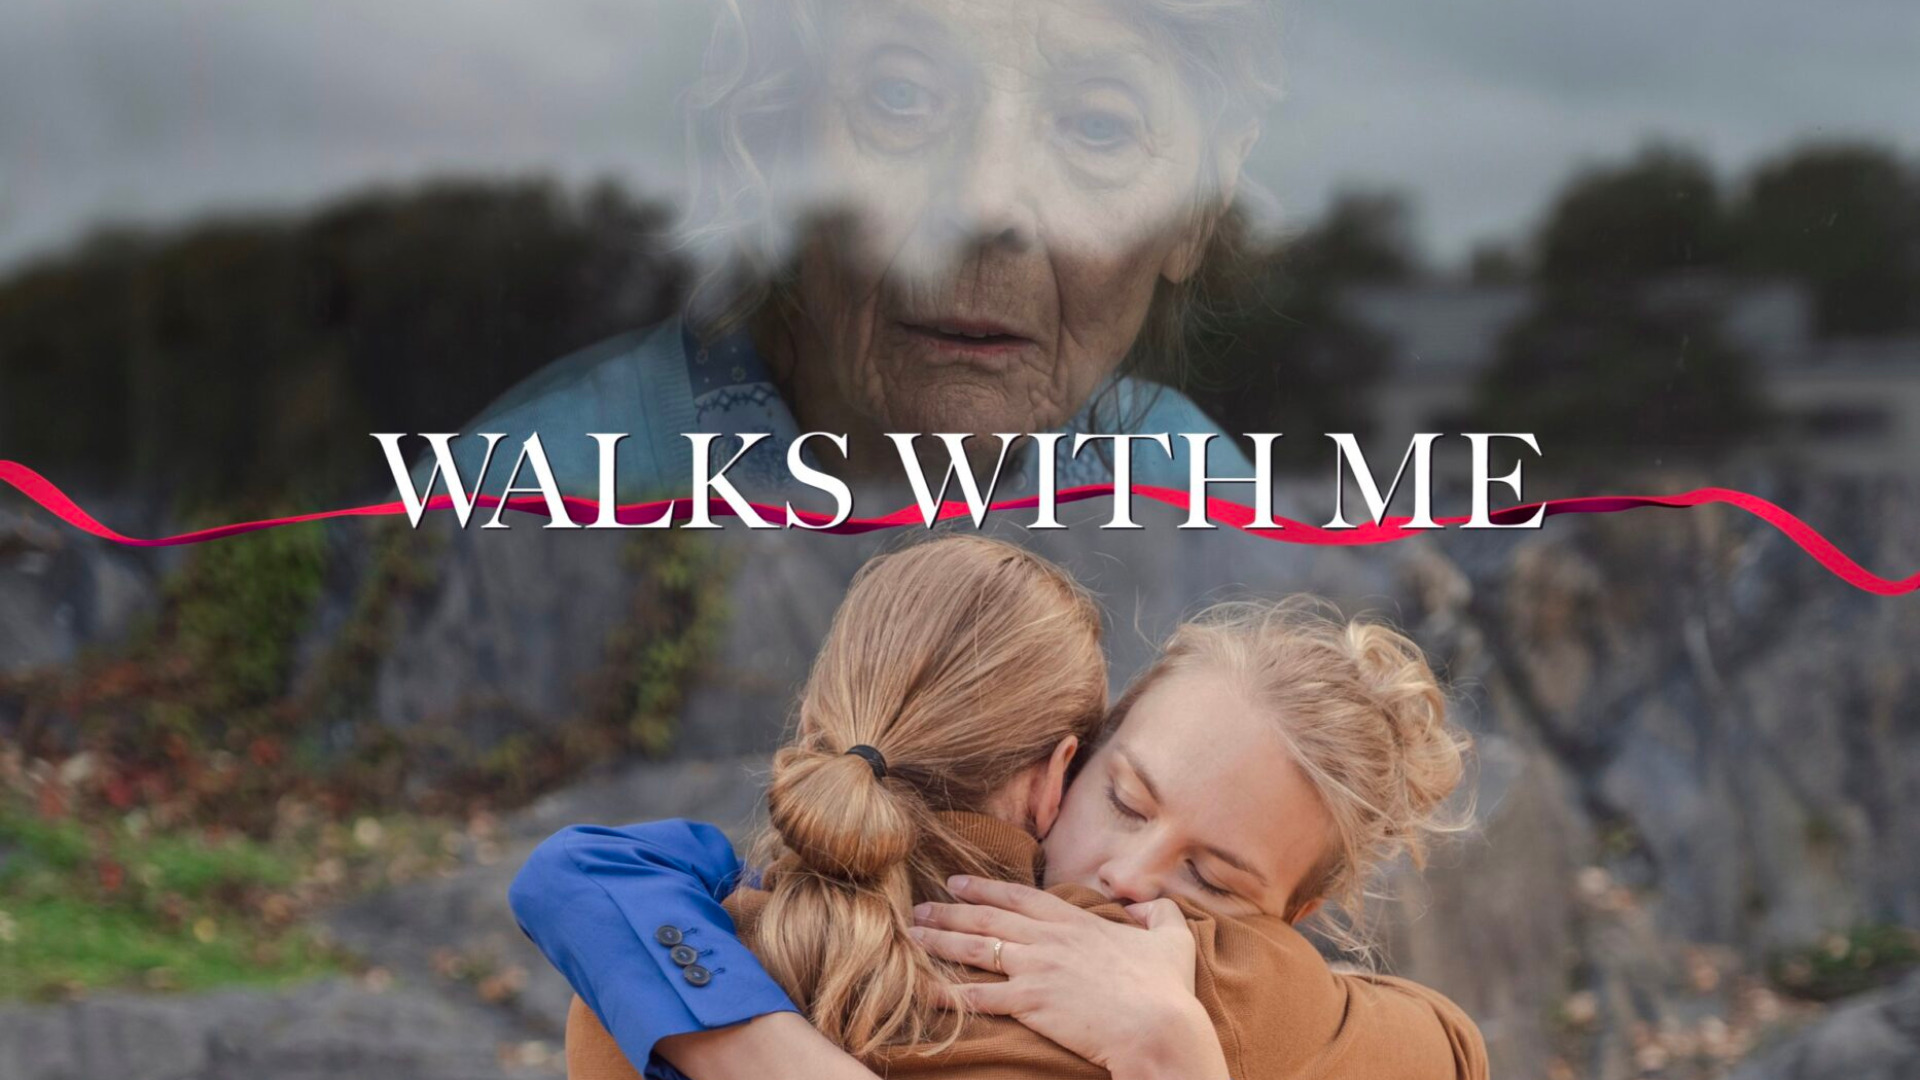 Kati Kallio Found The Perfect Medium For Her Art In Film – Now ‘Walks With Me’ Wins A Number Of International Awards